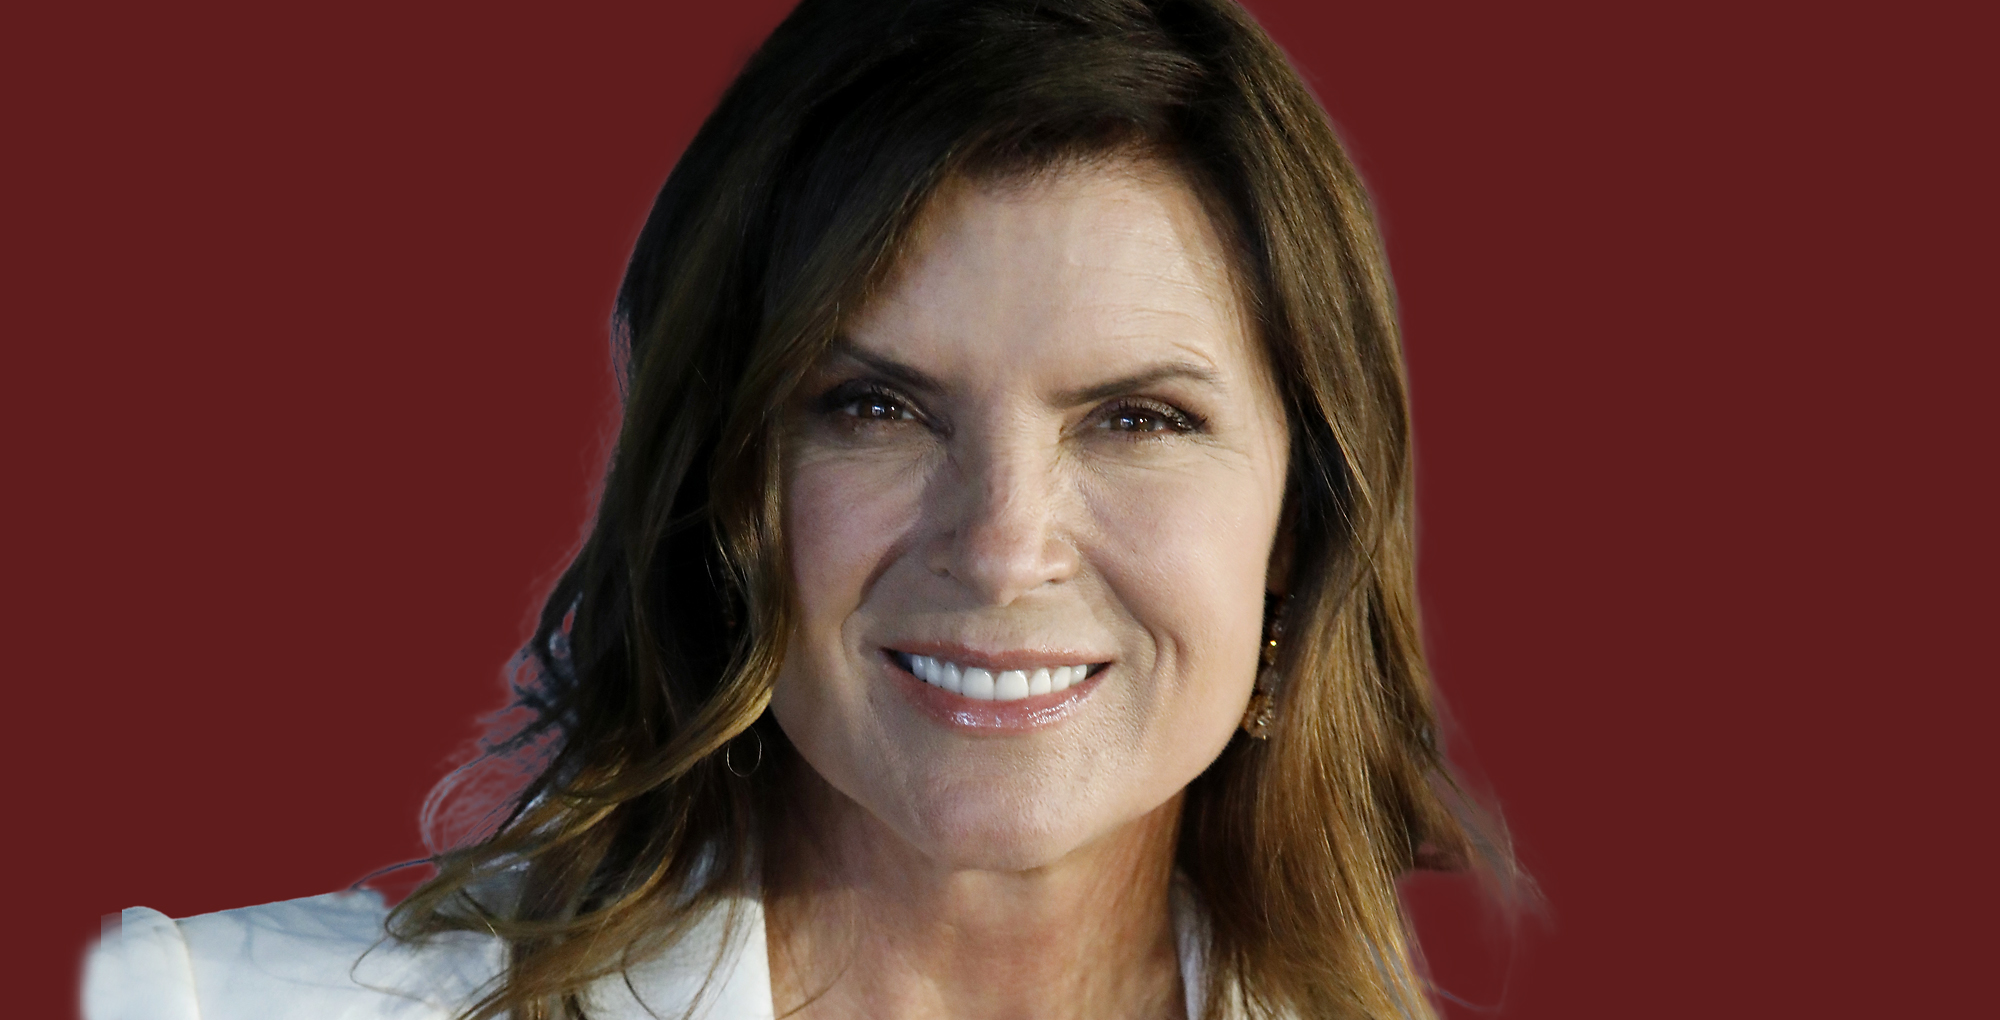 kimberlin brown who plays sheila carter on the bold and the beautiful.